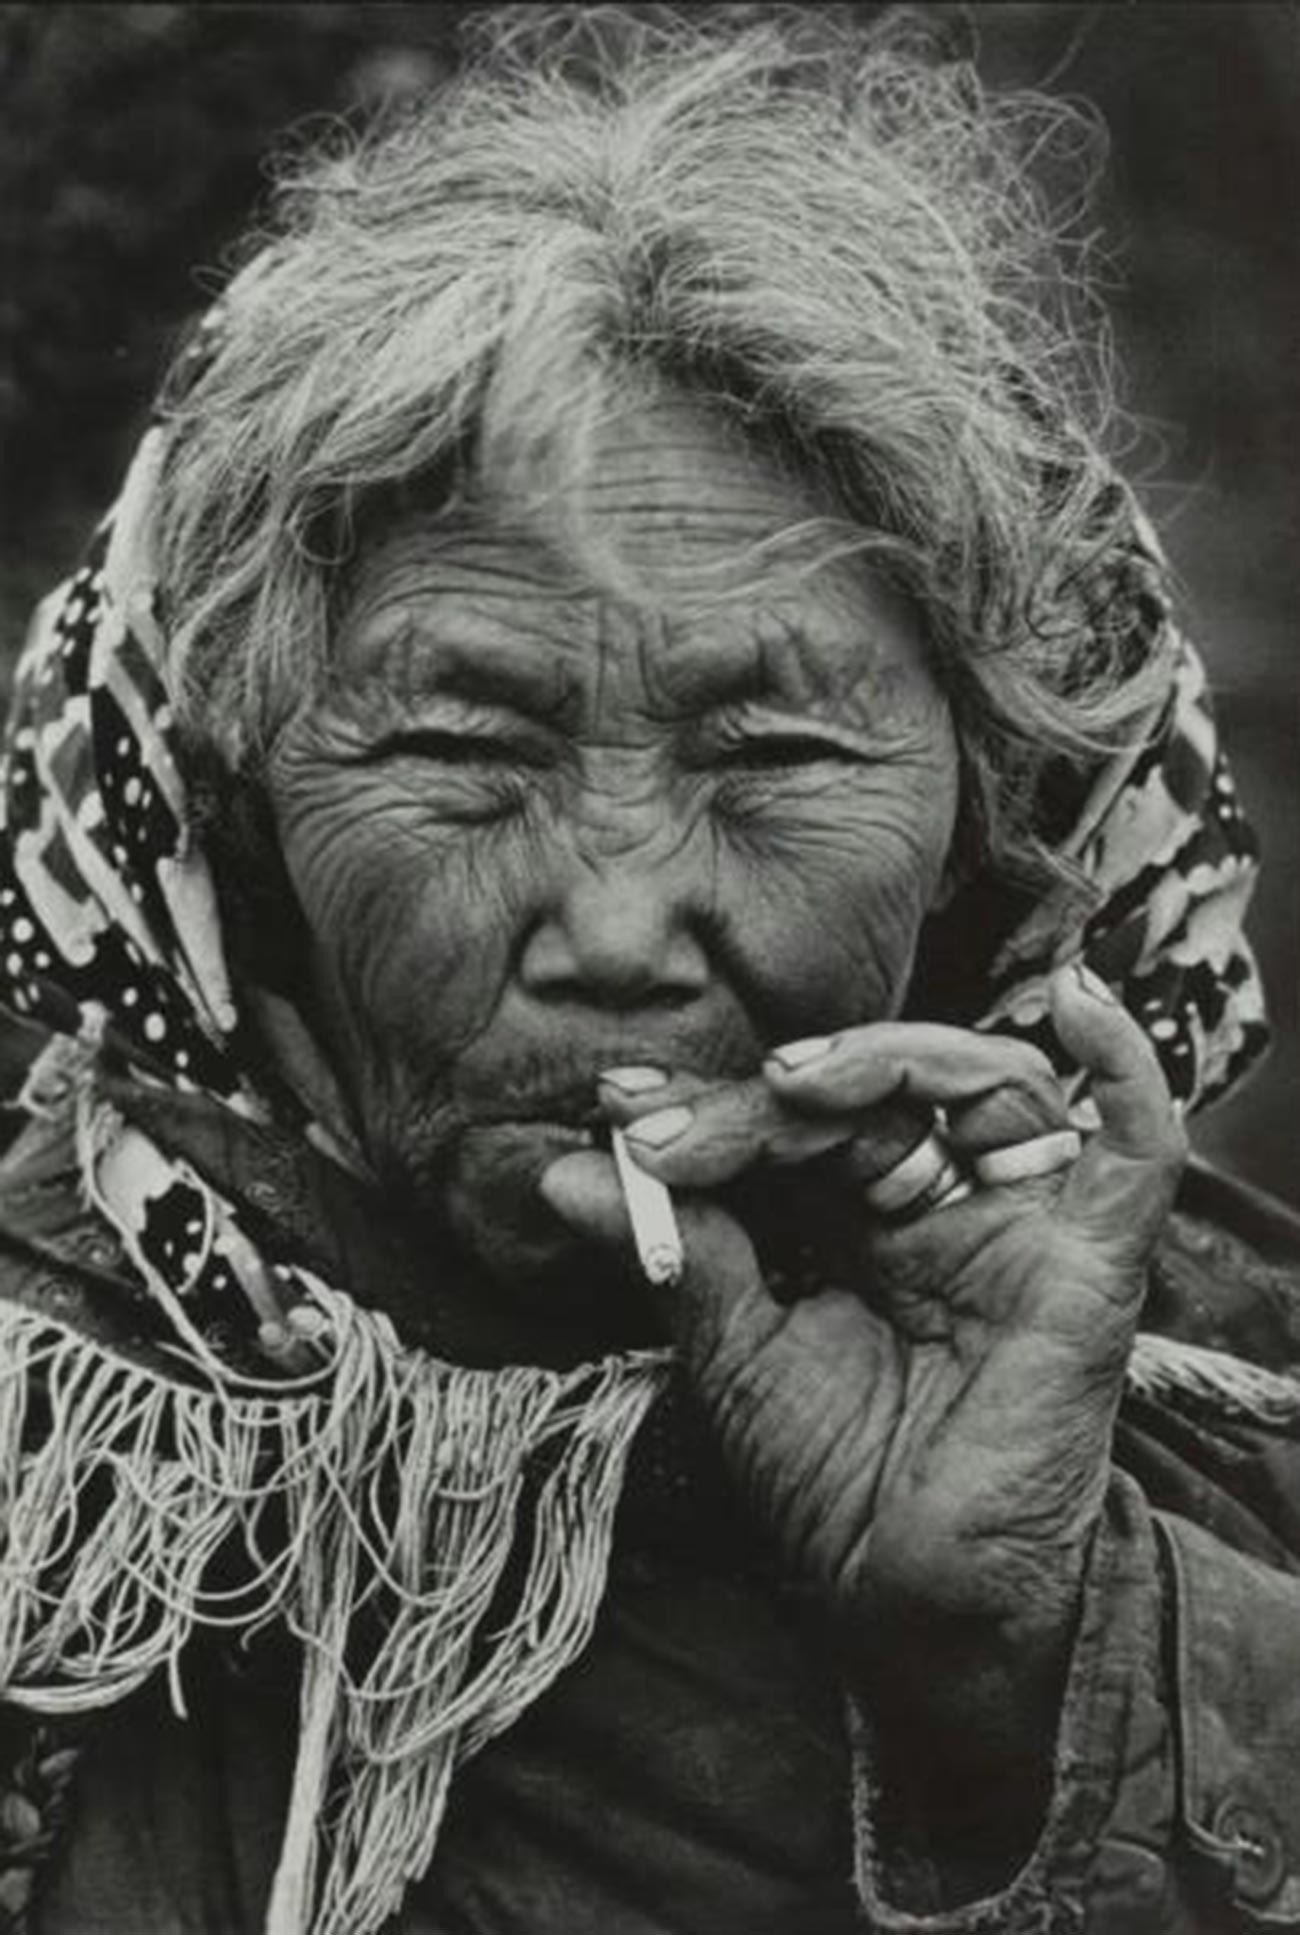 An old woman from Chukotka